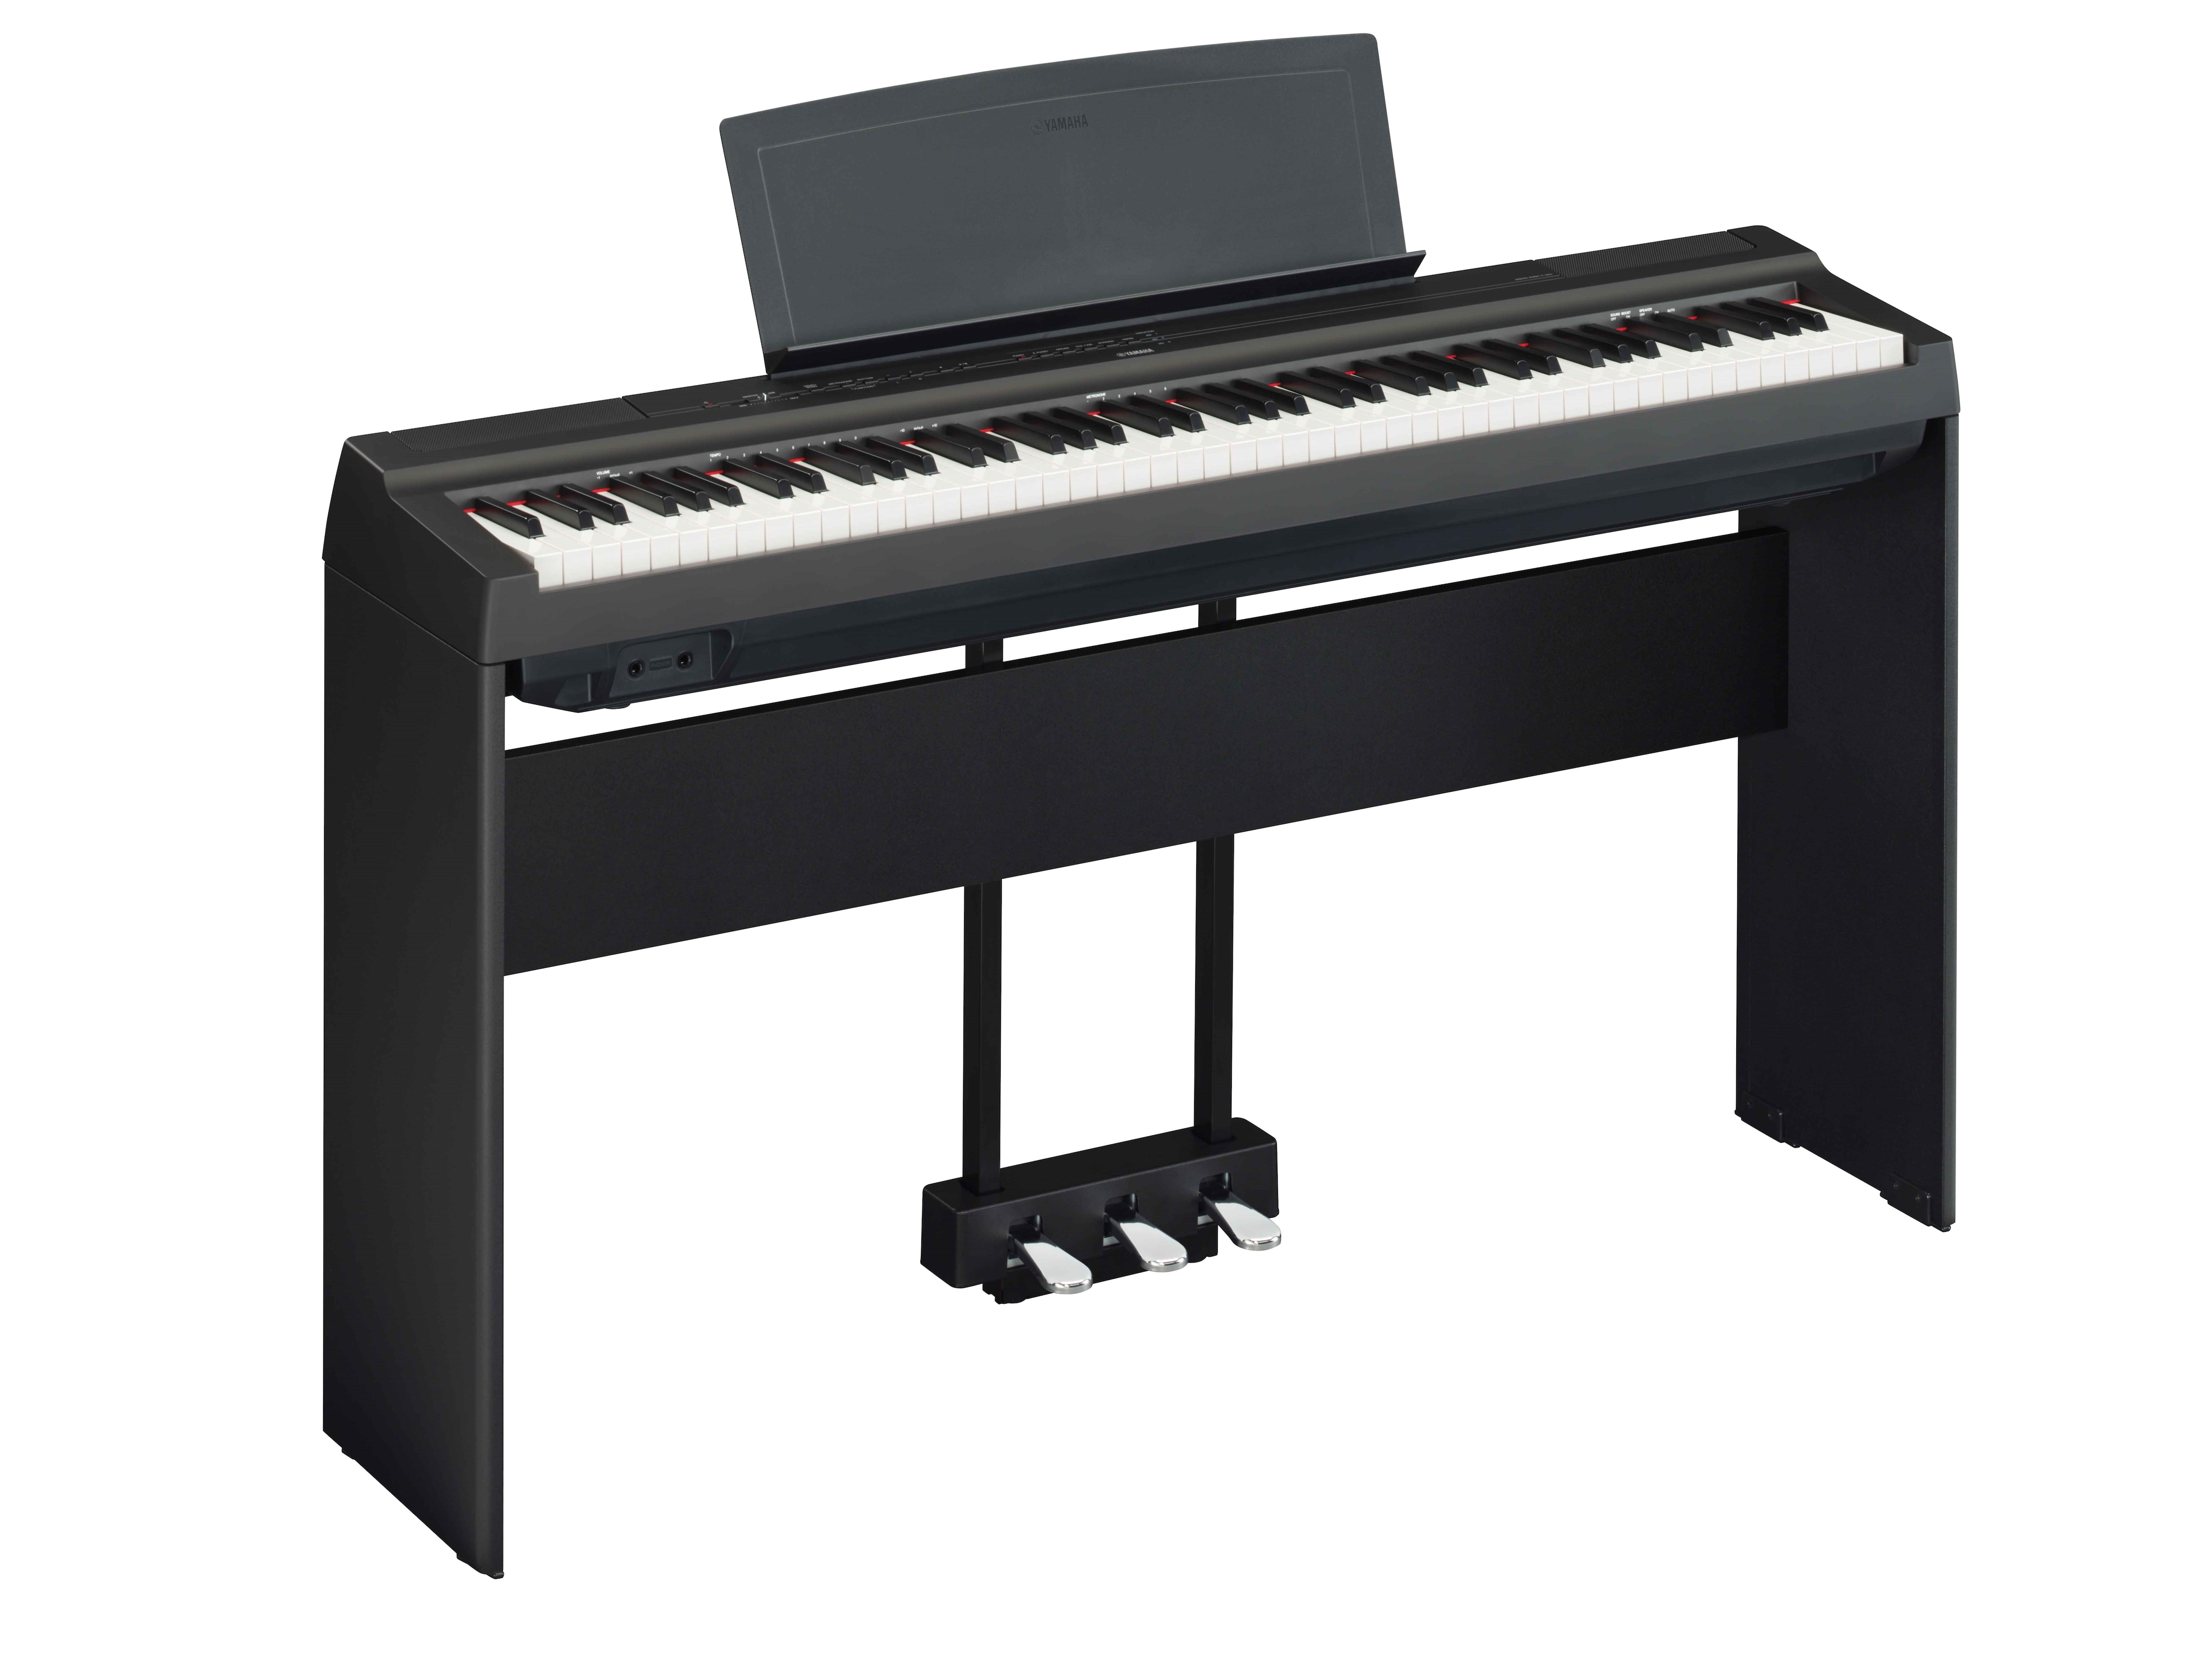 P-125a - Overview - P Series - Pianos - Musical Instruments 